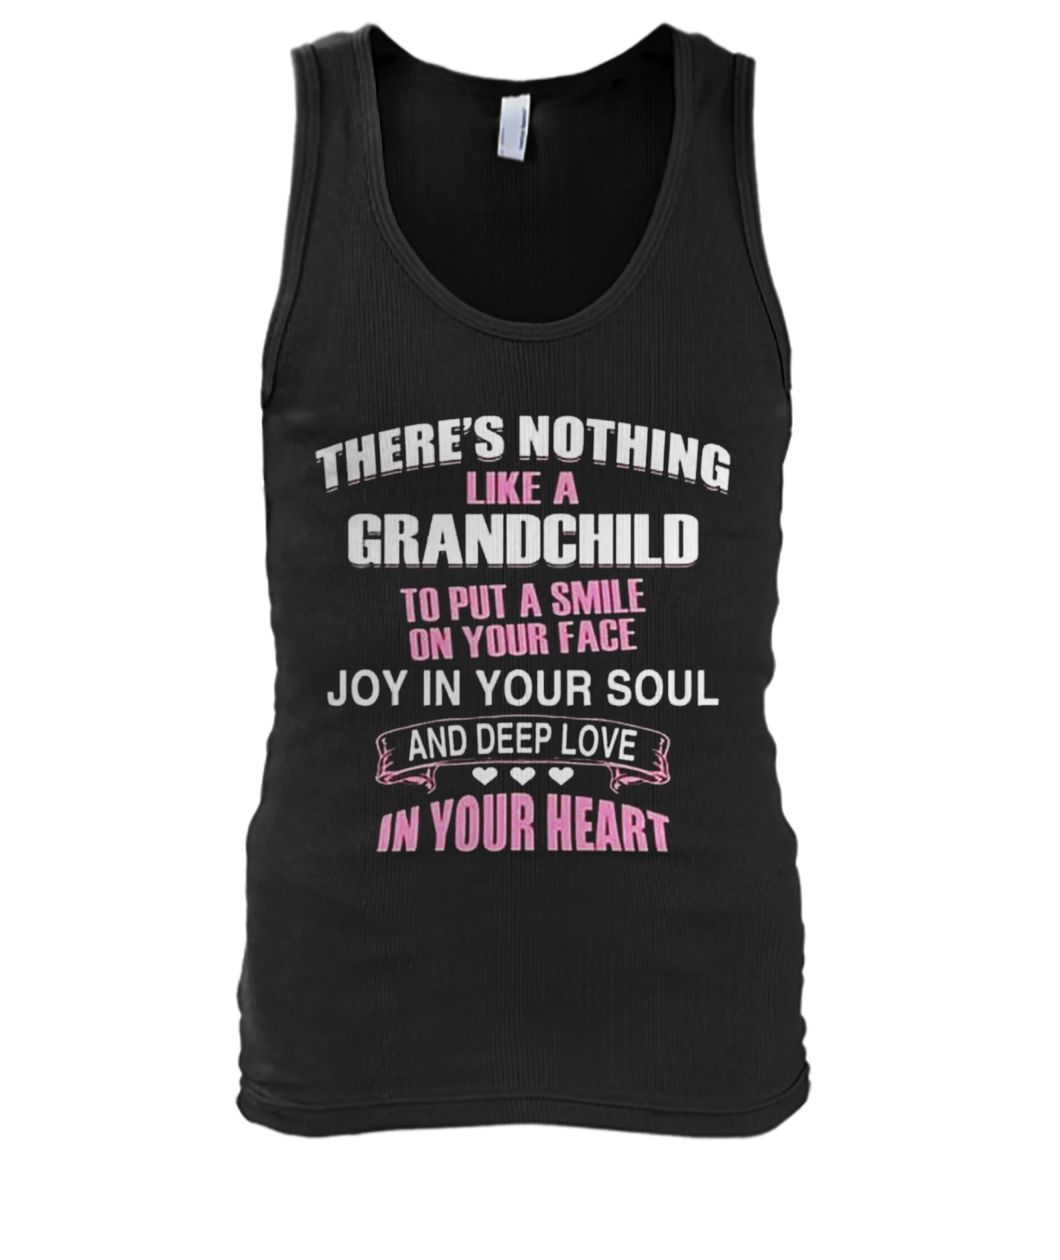 There's nothing like a grandchild to put a smile on your face men's tank top